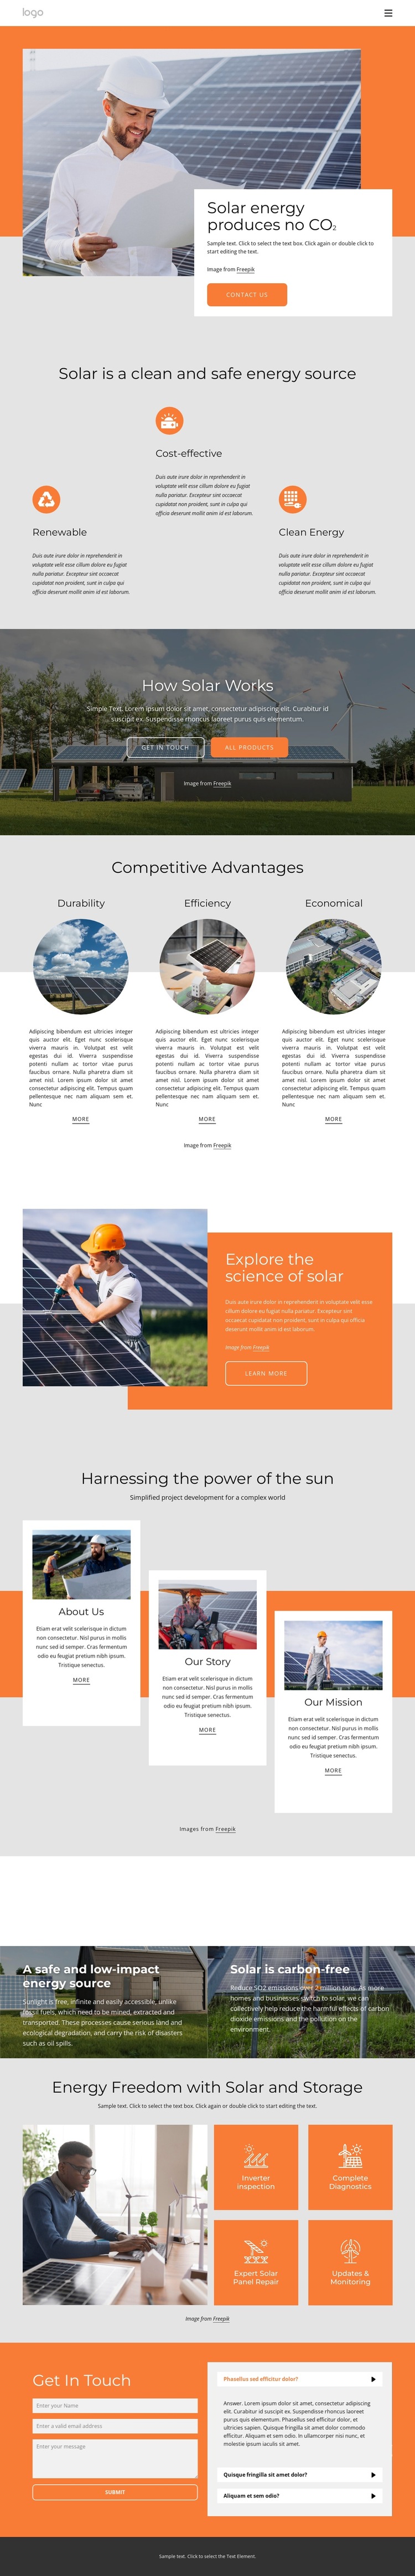 Power your home with clean solar energy HTML5 Template